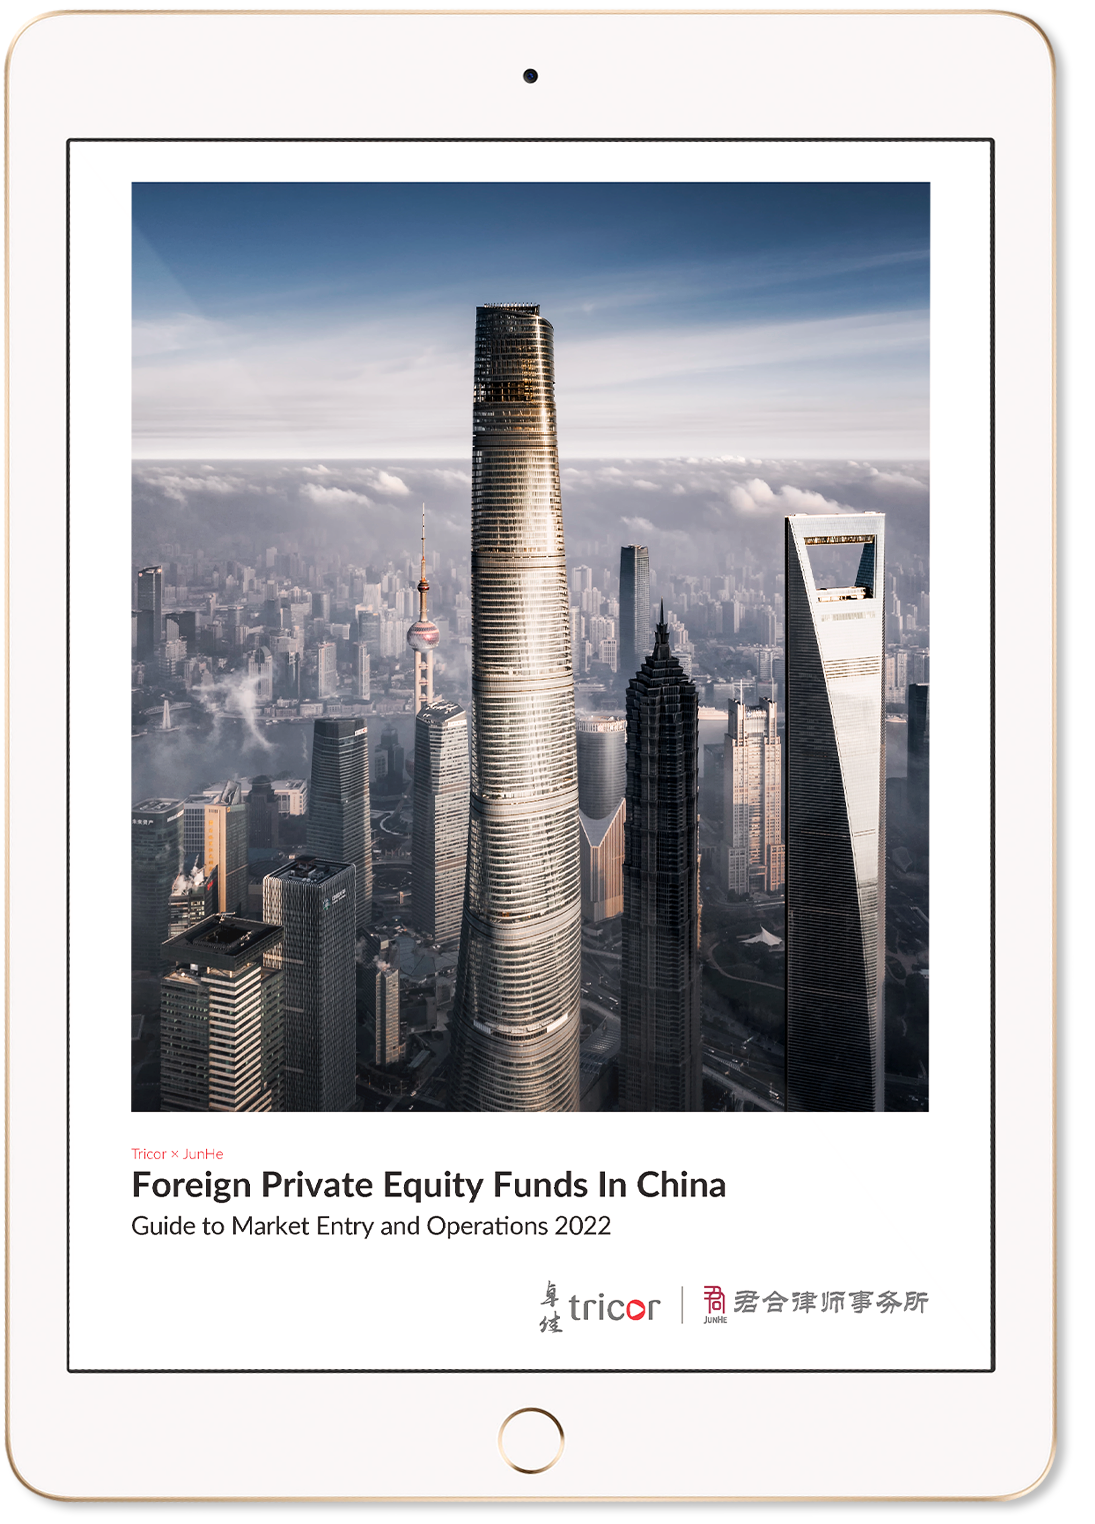 Foreign Private Equity Funds in China - Guide to Market Entry and Operations 20222